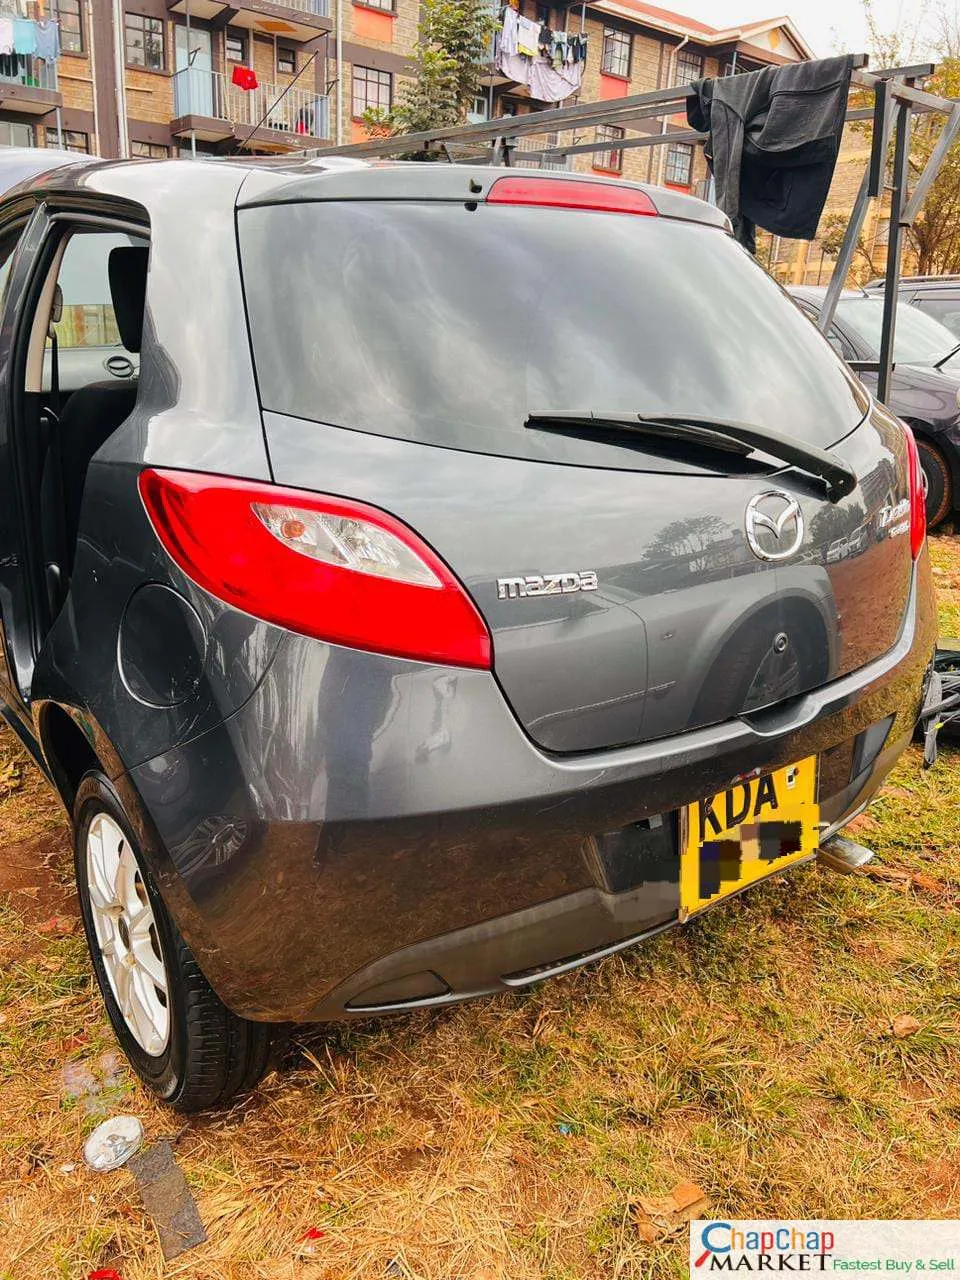 Cars Cars For Sale/Vehicles-Mazda Demio For sale in Kenya KD 580K ONLY You Pay 30% DEPOSIT TRADE IN OK EXCLUSIVE 6